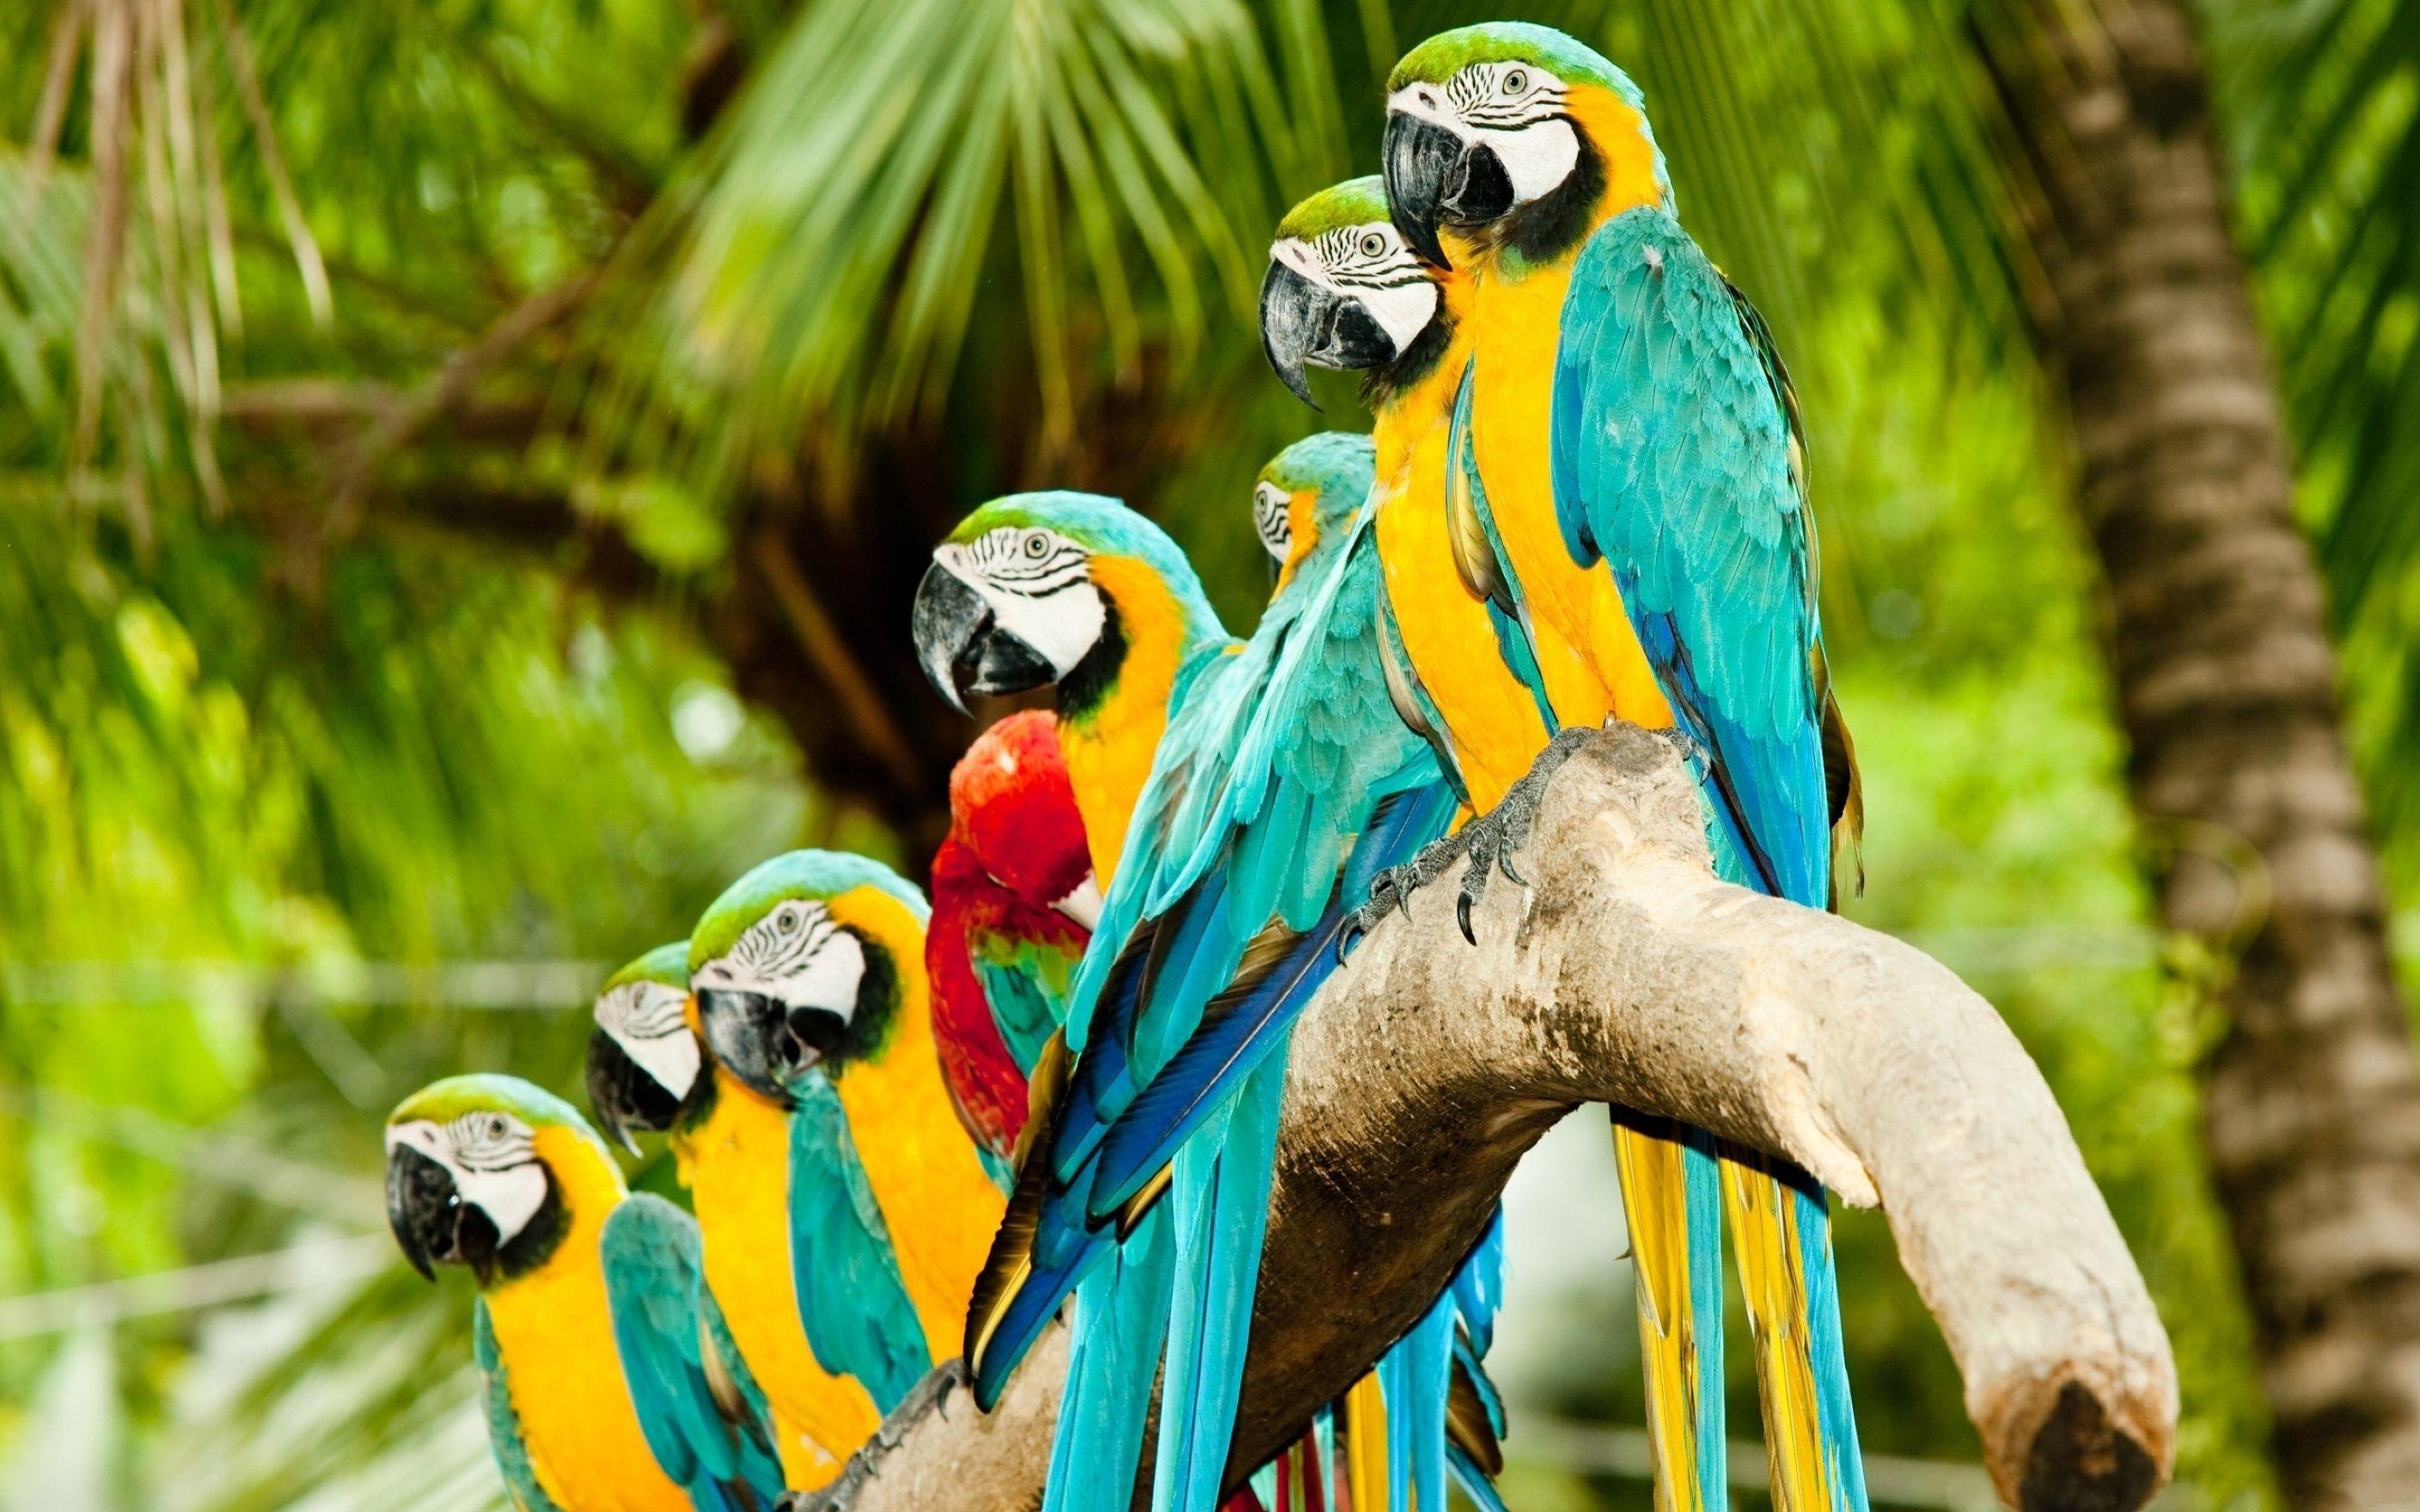 Cool Colorful Animal Wallpapers - Top Free Cool Colorful Animal